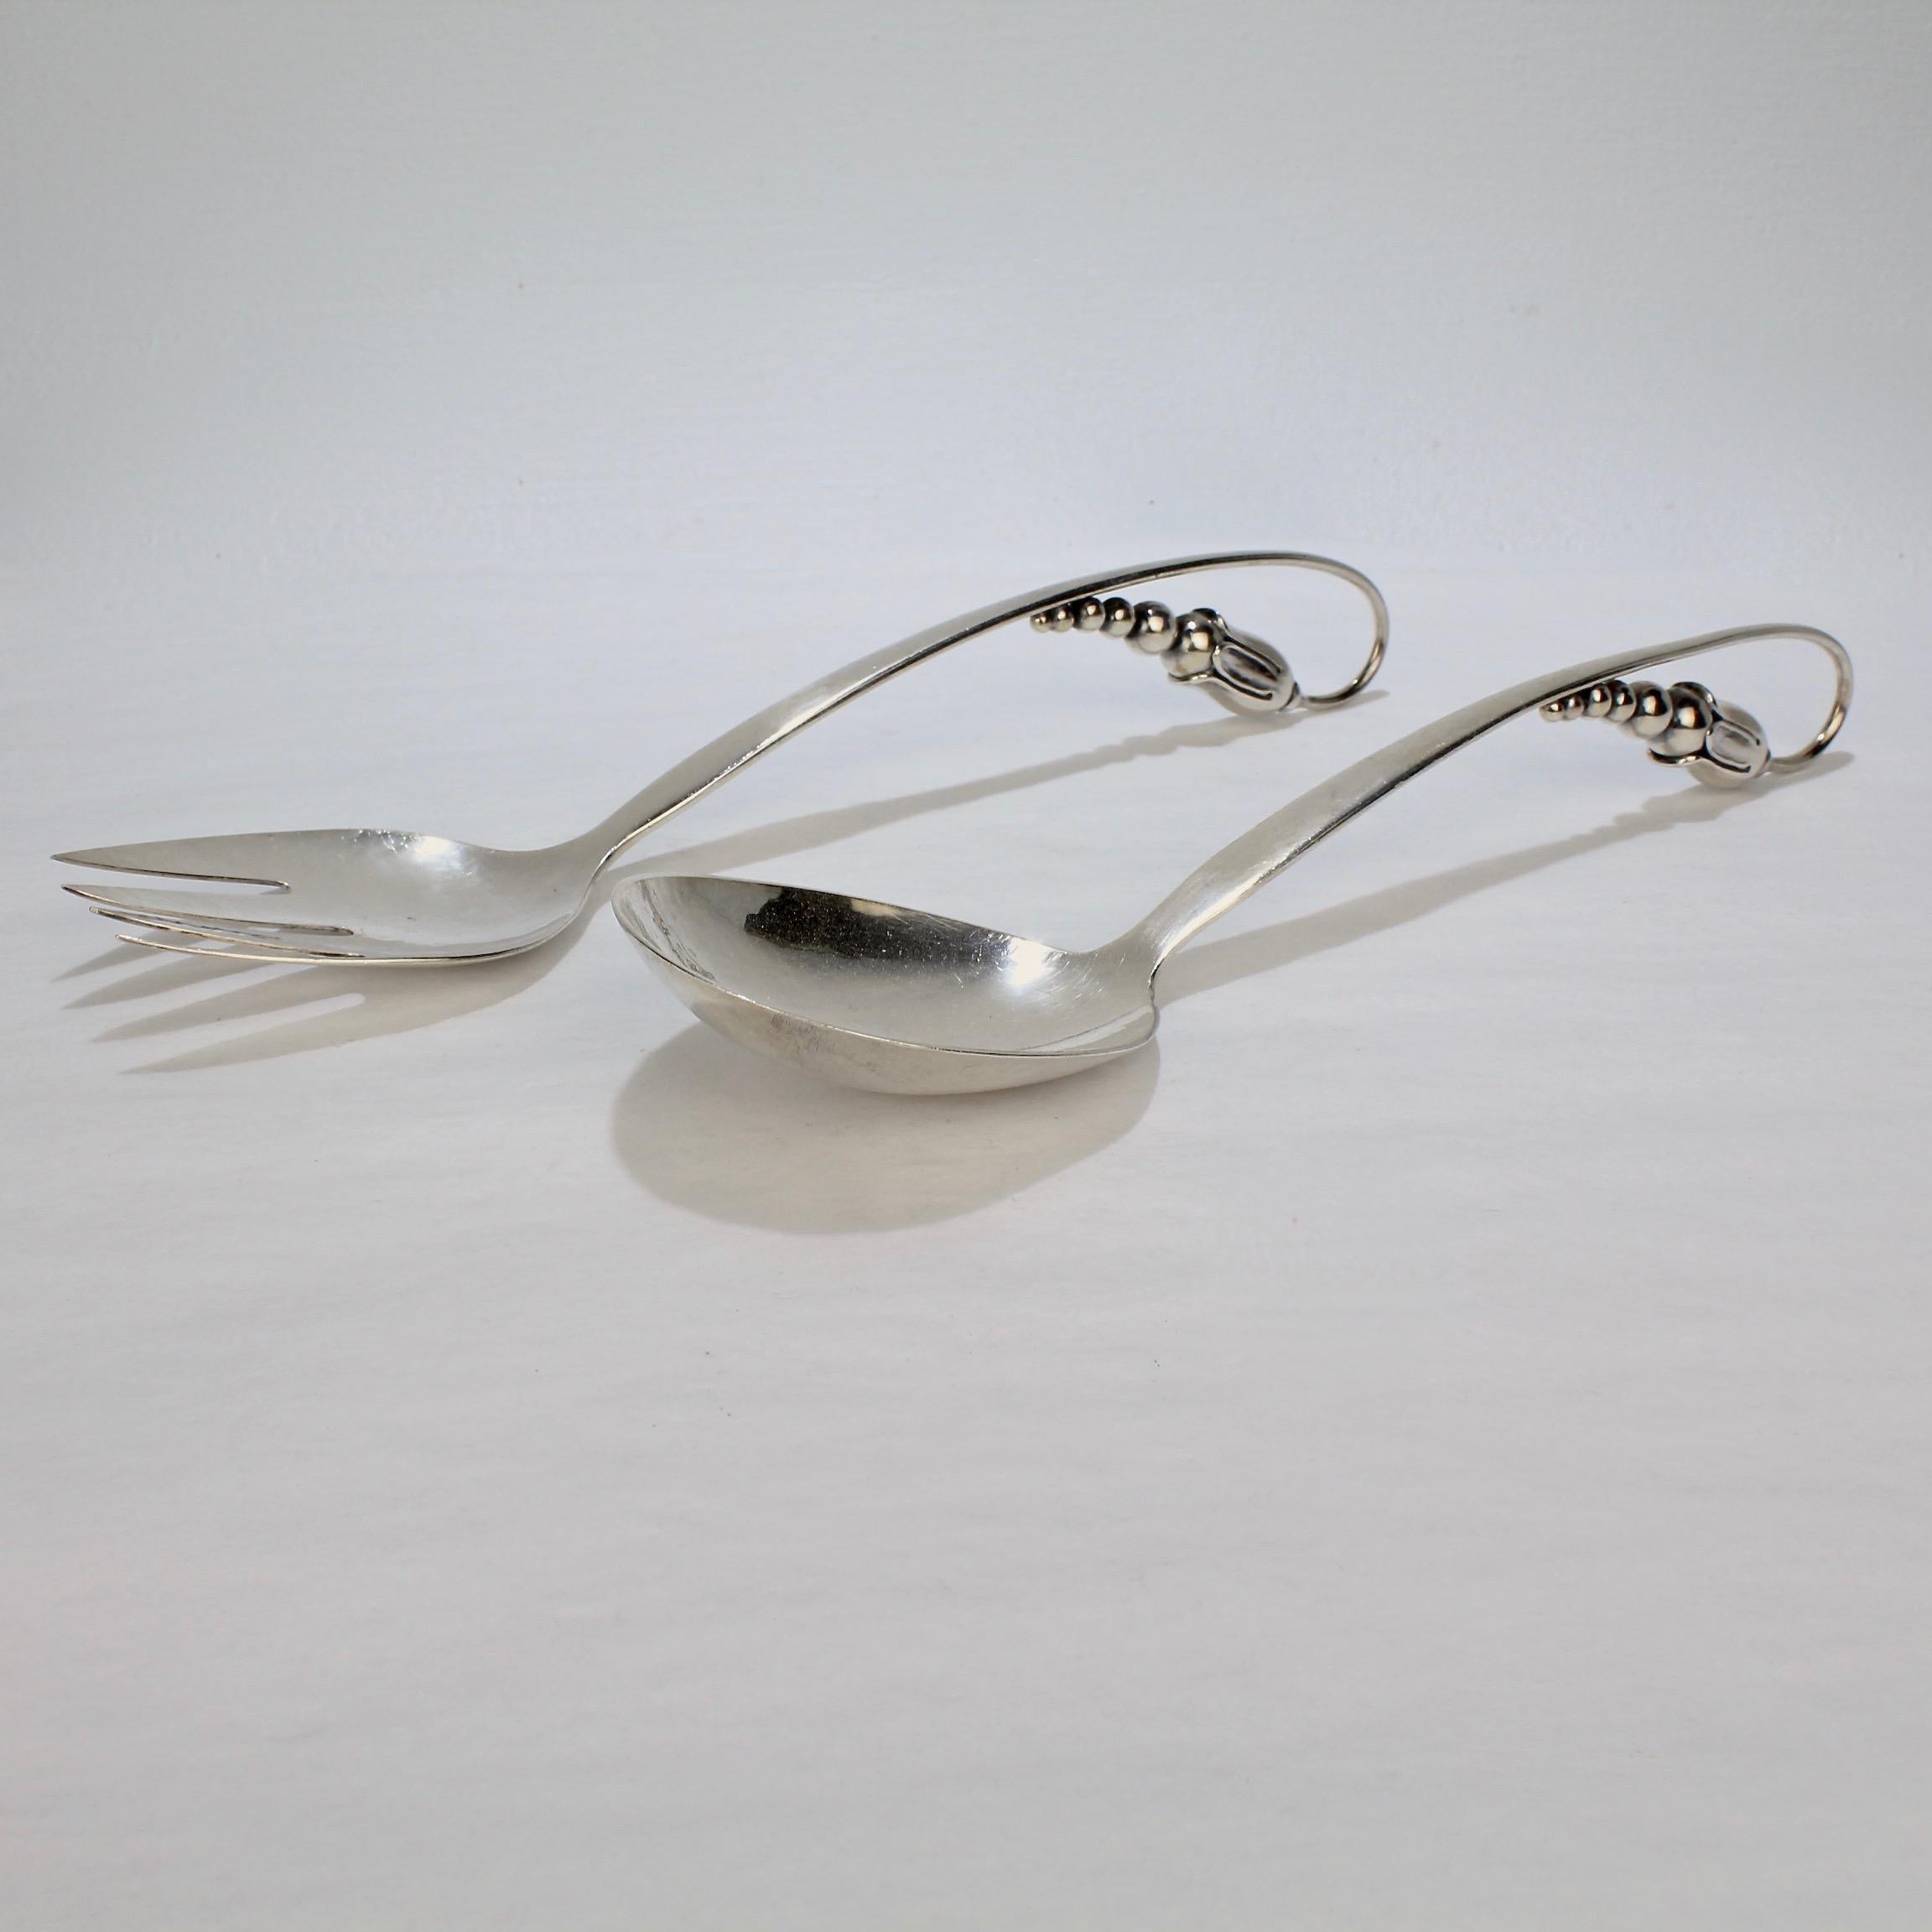 A superb pair of modernist sterling silver salad servers.

In the Blossom Pattern by the Danish silversmith Orla Vagn Mogensen.

Marked to the reverse: 35, O. Mogensen, Sterling, and Denmark.

Fork Length: ca. 10 1/4 in.
Spoon Length: ca. 10 1/2